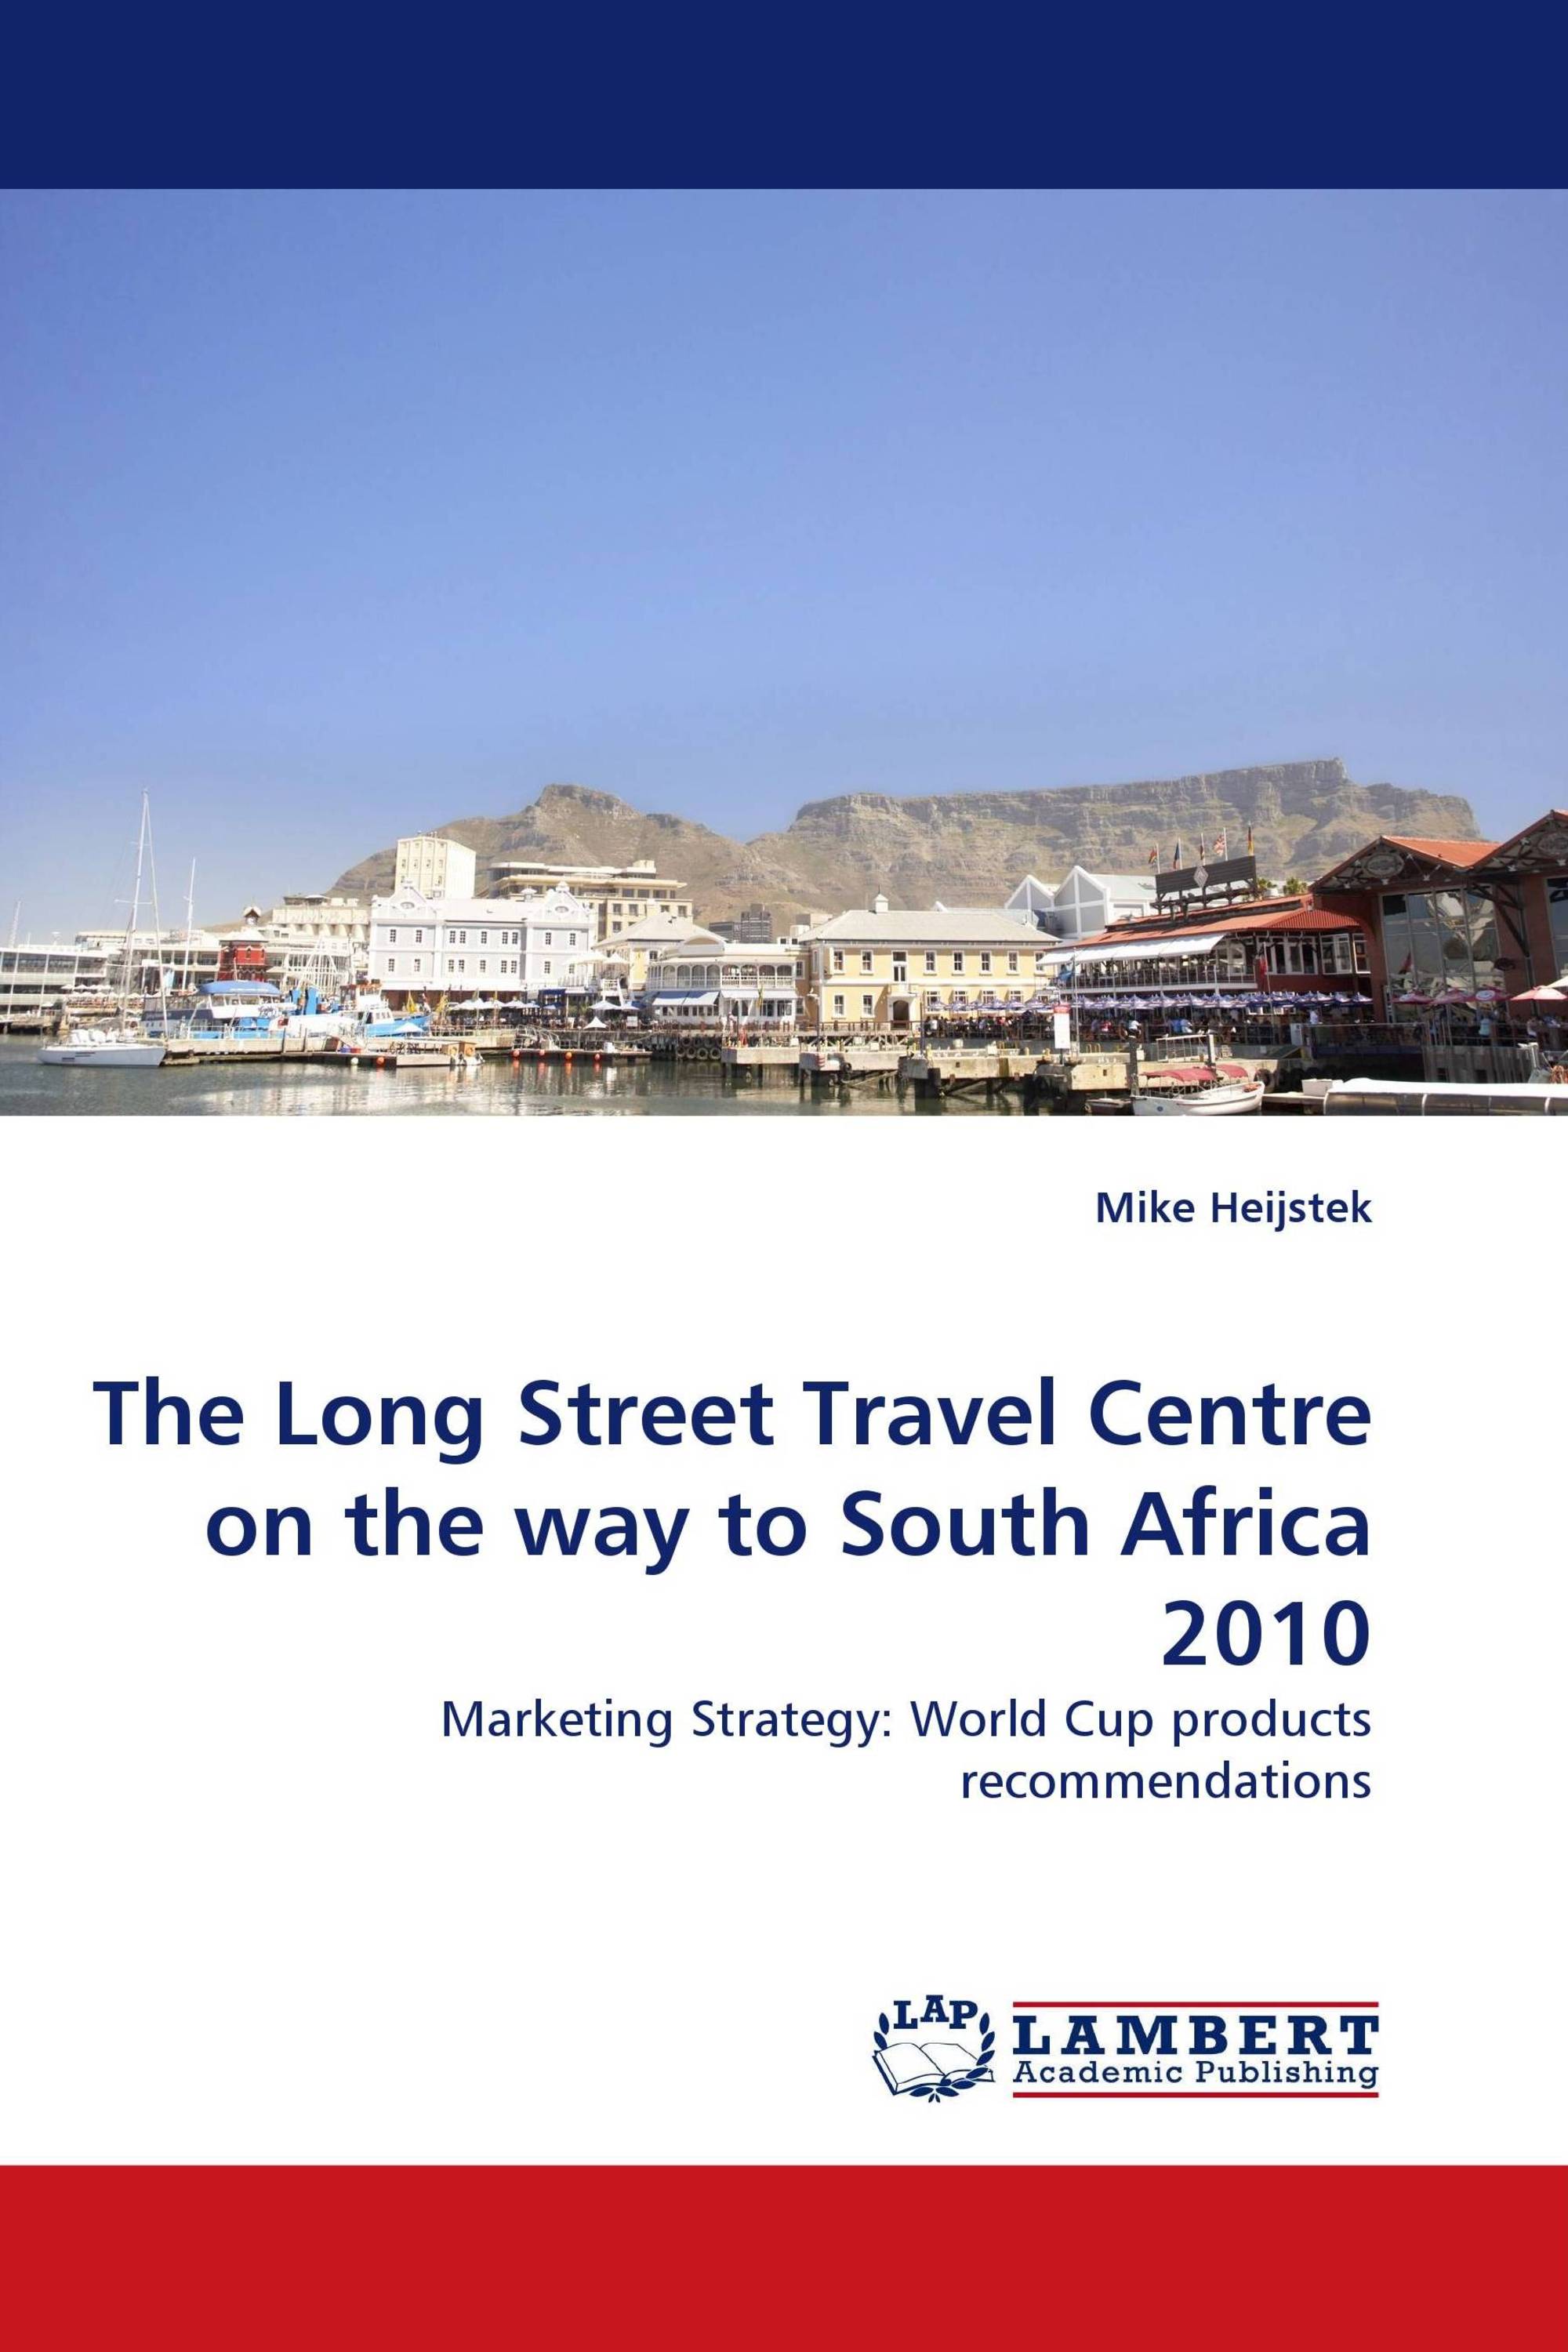 The Long Street Travel Centre on the way to South Africa 2010